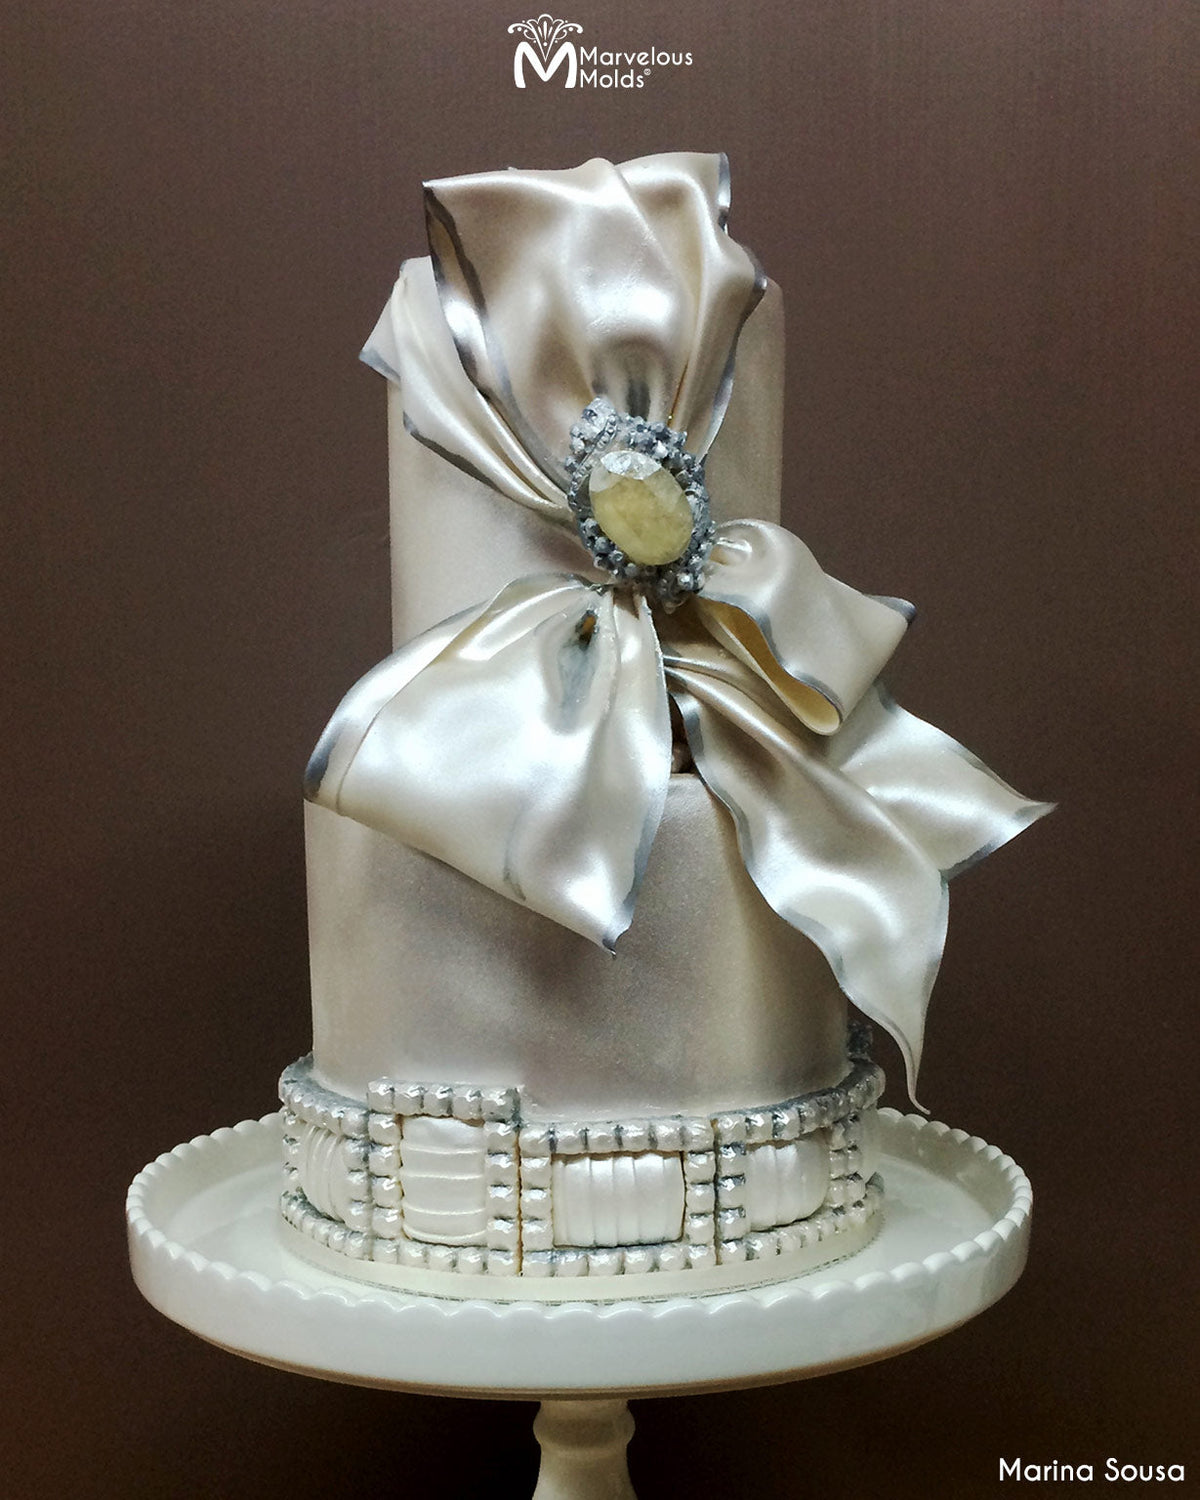 Vintage Bow Wedding Cake Decorated with the Imperial Brooch Silicone Mold by Marvelous Molds